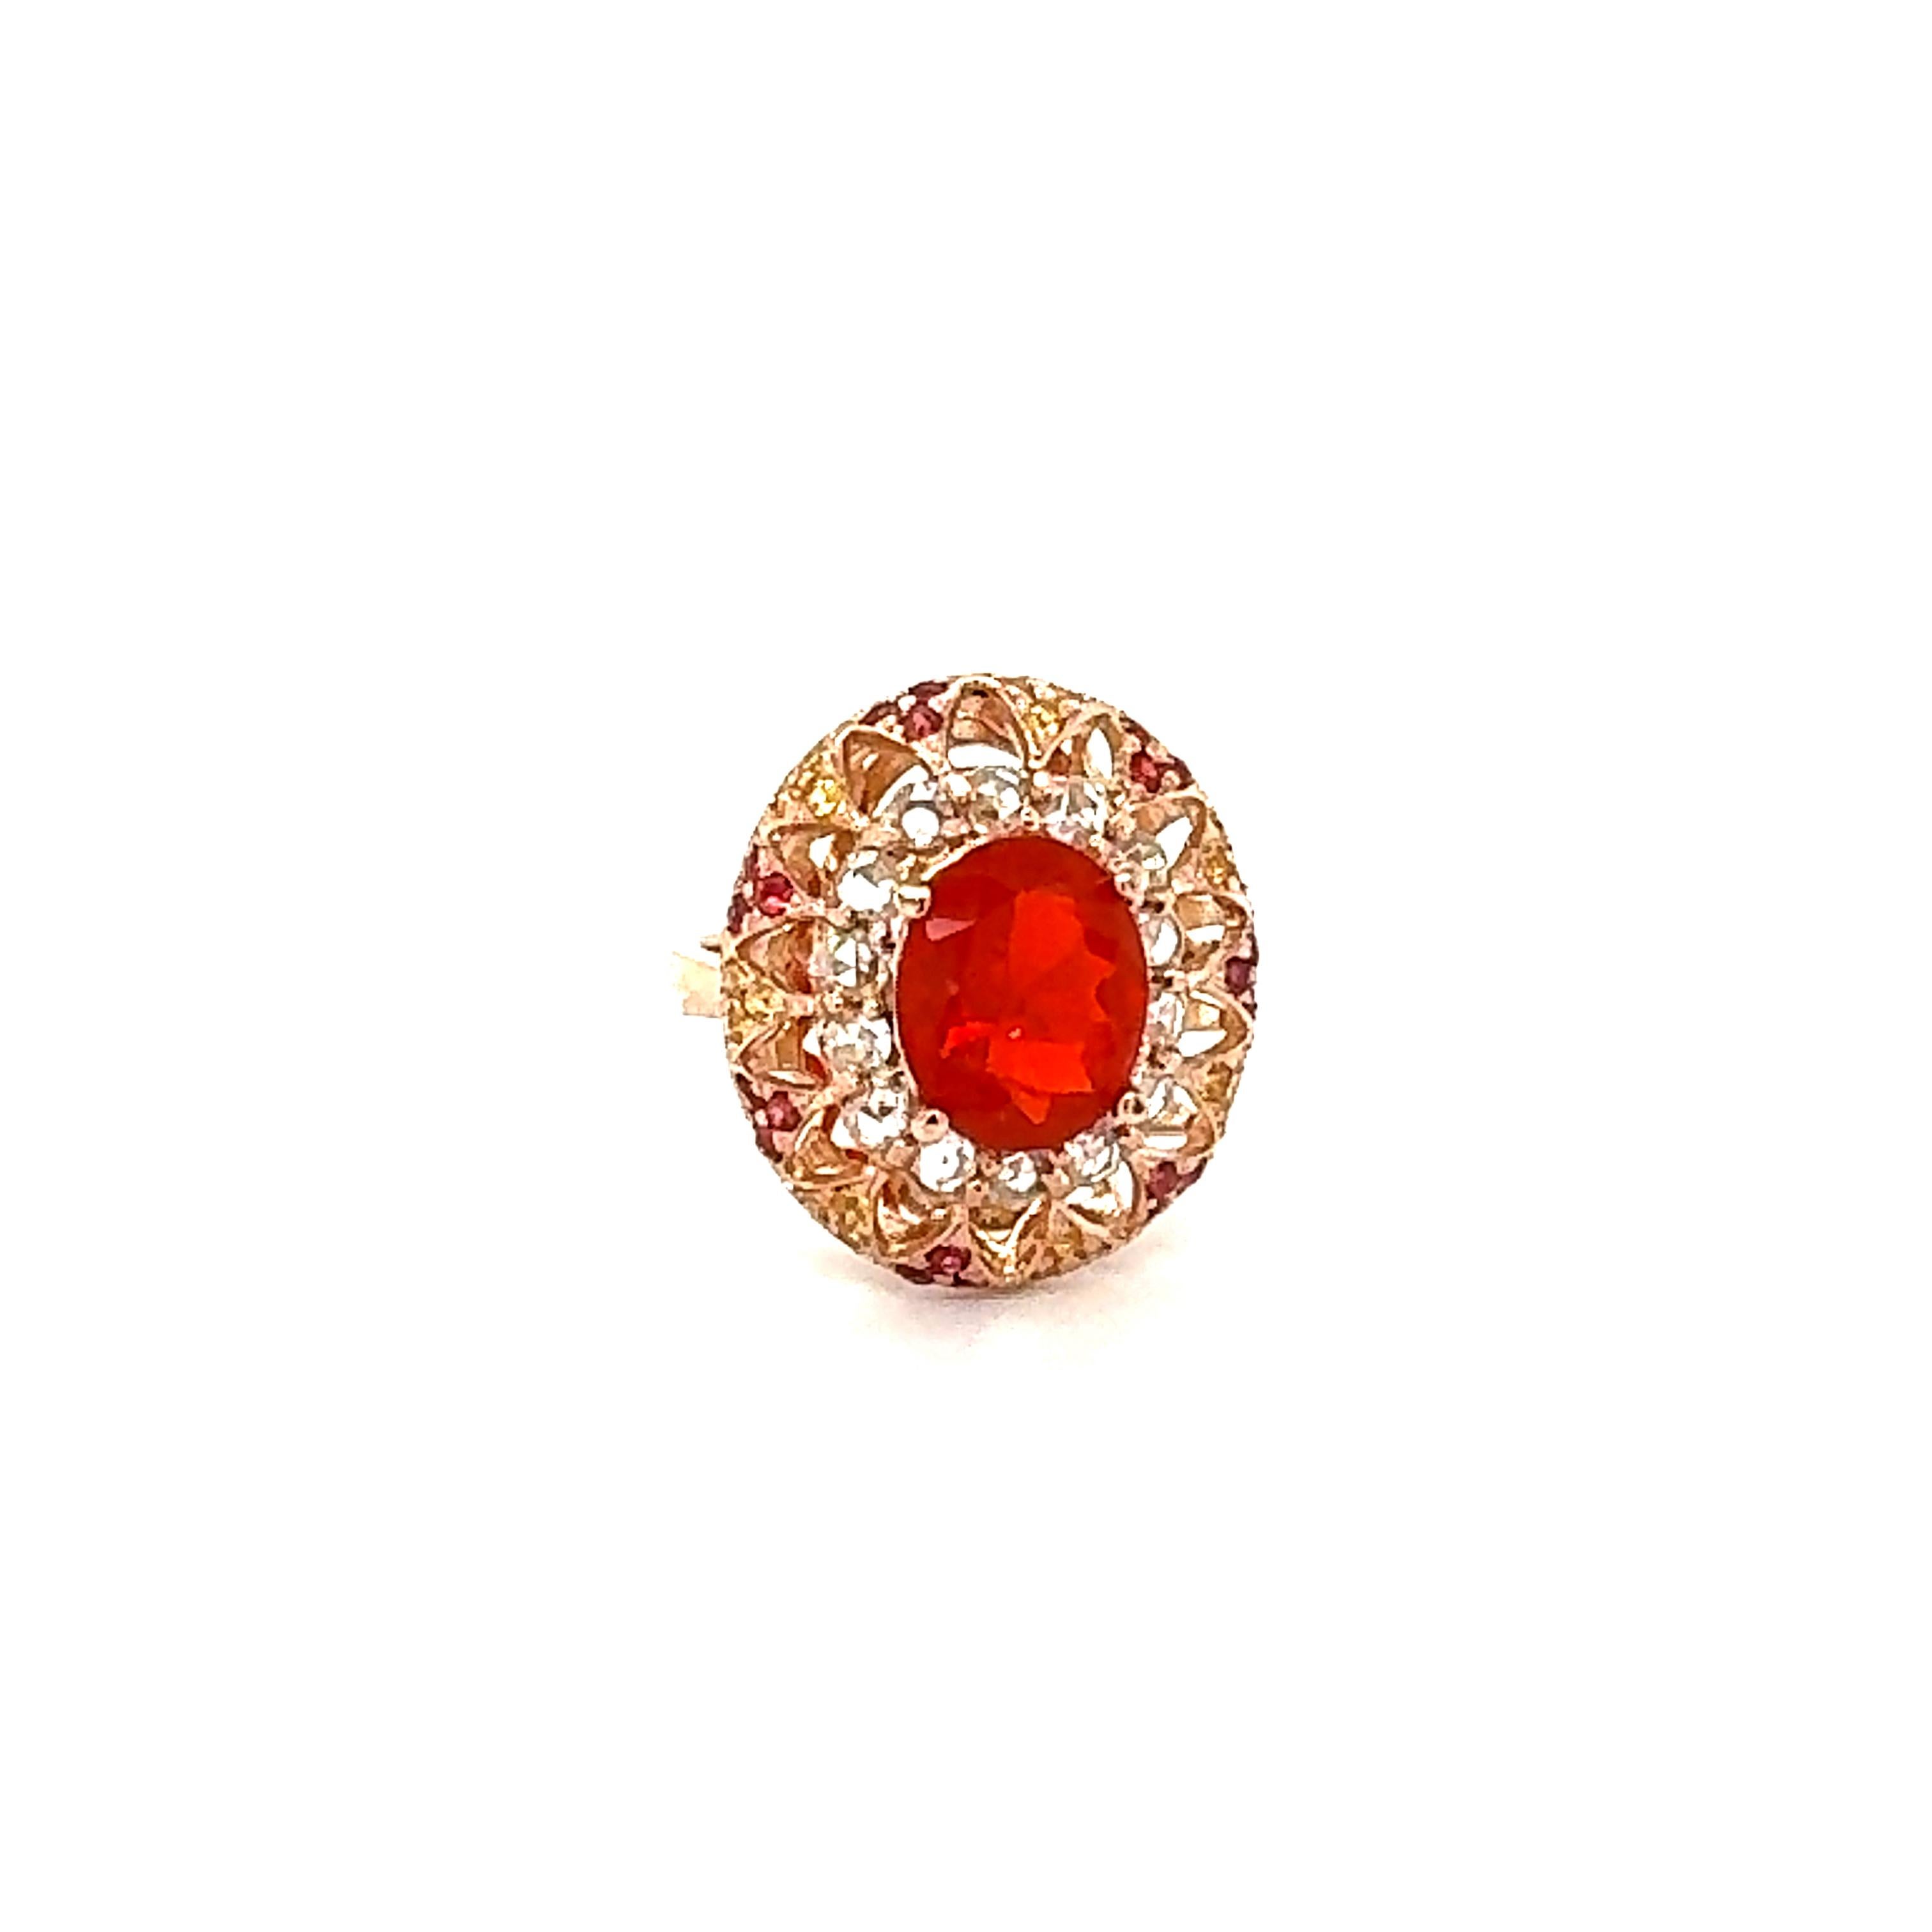 2.93 Carat Fire Opal Rose Cut Diamond Rose Gold Cocktail Ring

This ring has a 1.84 Carat Oval Cut Fire Opal as its center stone and is elegantly surrounded by 15 Natural Rose Cut Diamonds that weigh 0.52 Carats and 42 Yellow and Red Sapphires that